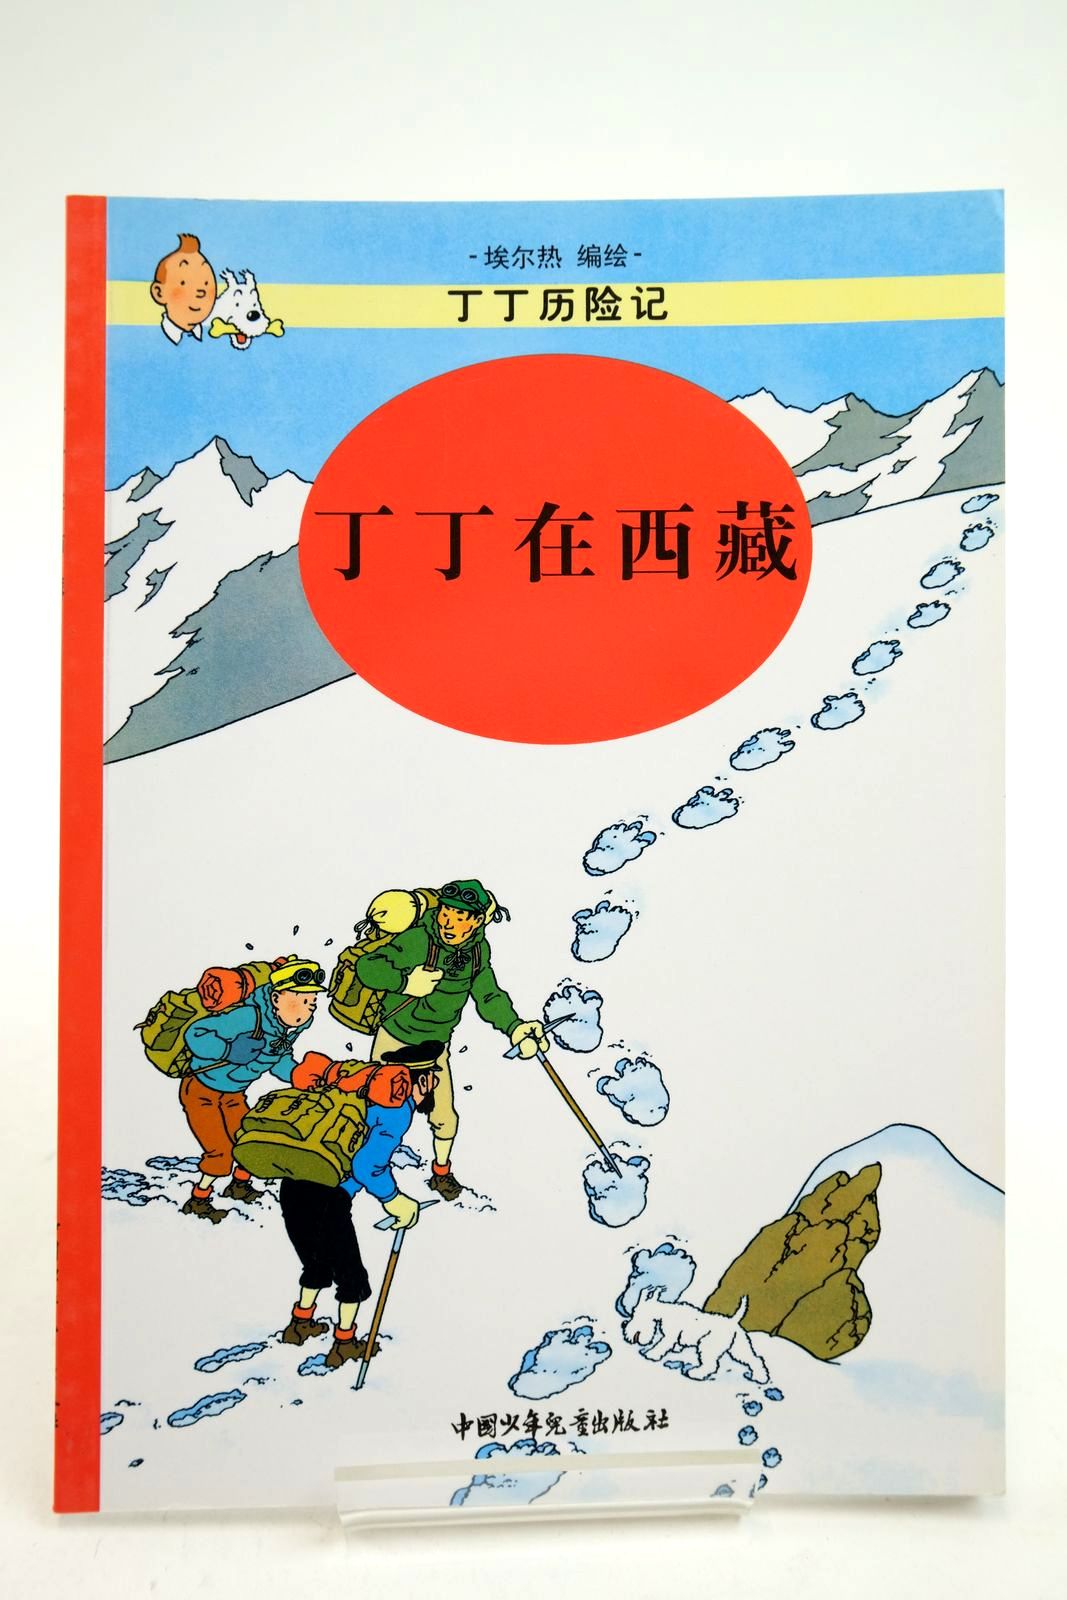 Photo of THE ADVENTURES OF TINTIN: TINTIN IN TIBET (CHINESE LANGUAGE EDITION) written by Herge, illustrated by Herge, published by China Press (STOCK CODE: 2140357)  for sale by Stella & Rose's Books